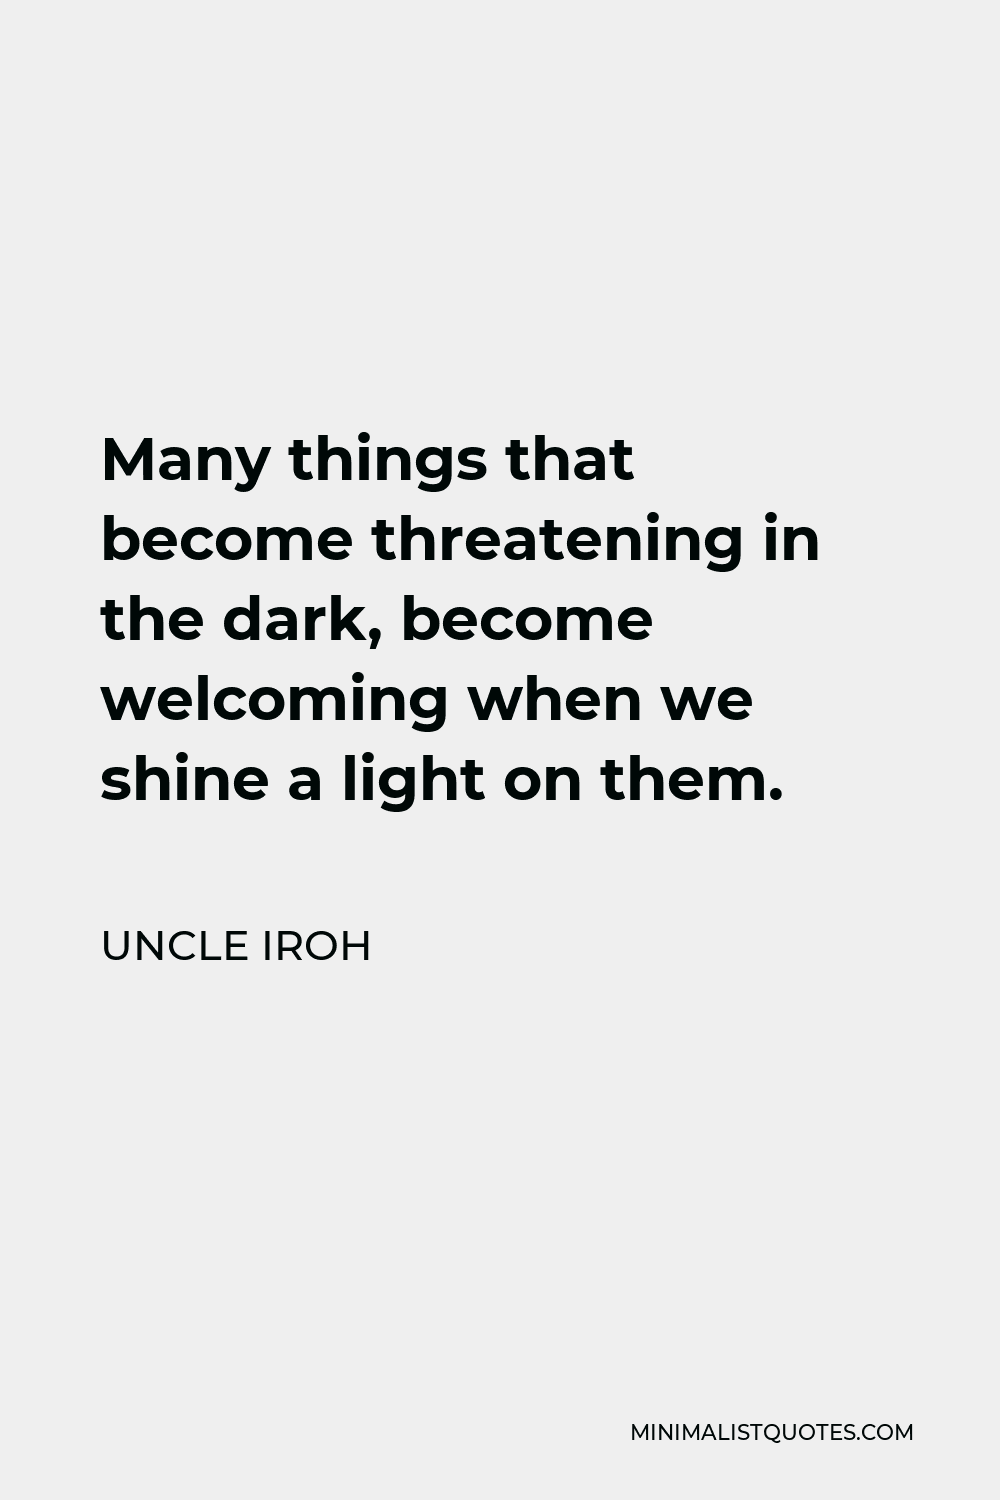 Uncle Iroh Quote - Many things that become threatening in the dark, become welcoming when we shine a light on them.